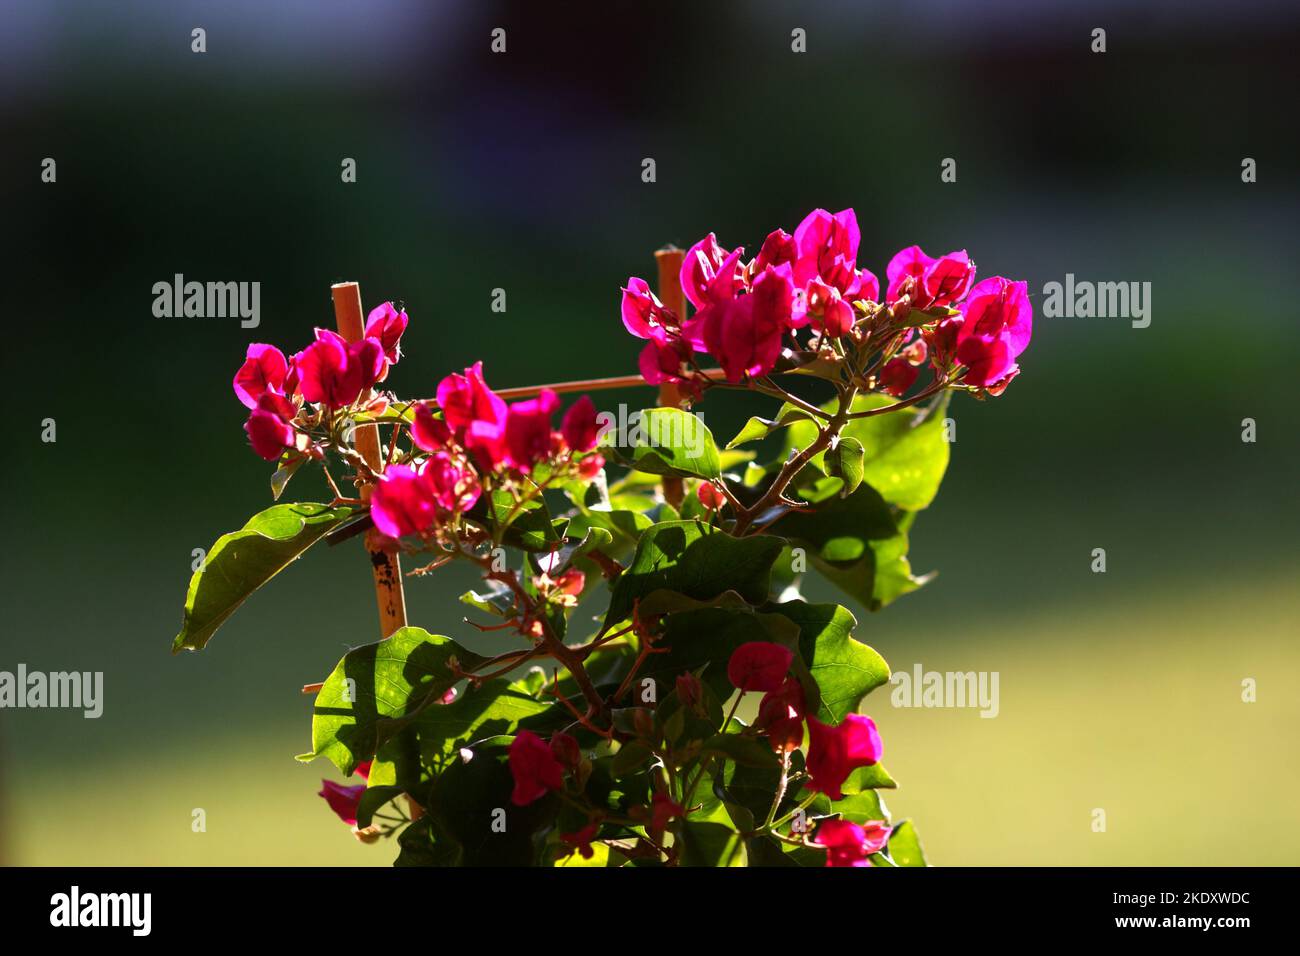 Pink bougainvillea growing in a pot in a garden, Szigethalom, Hungary Stock Photo